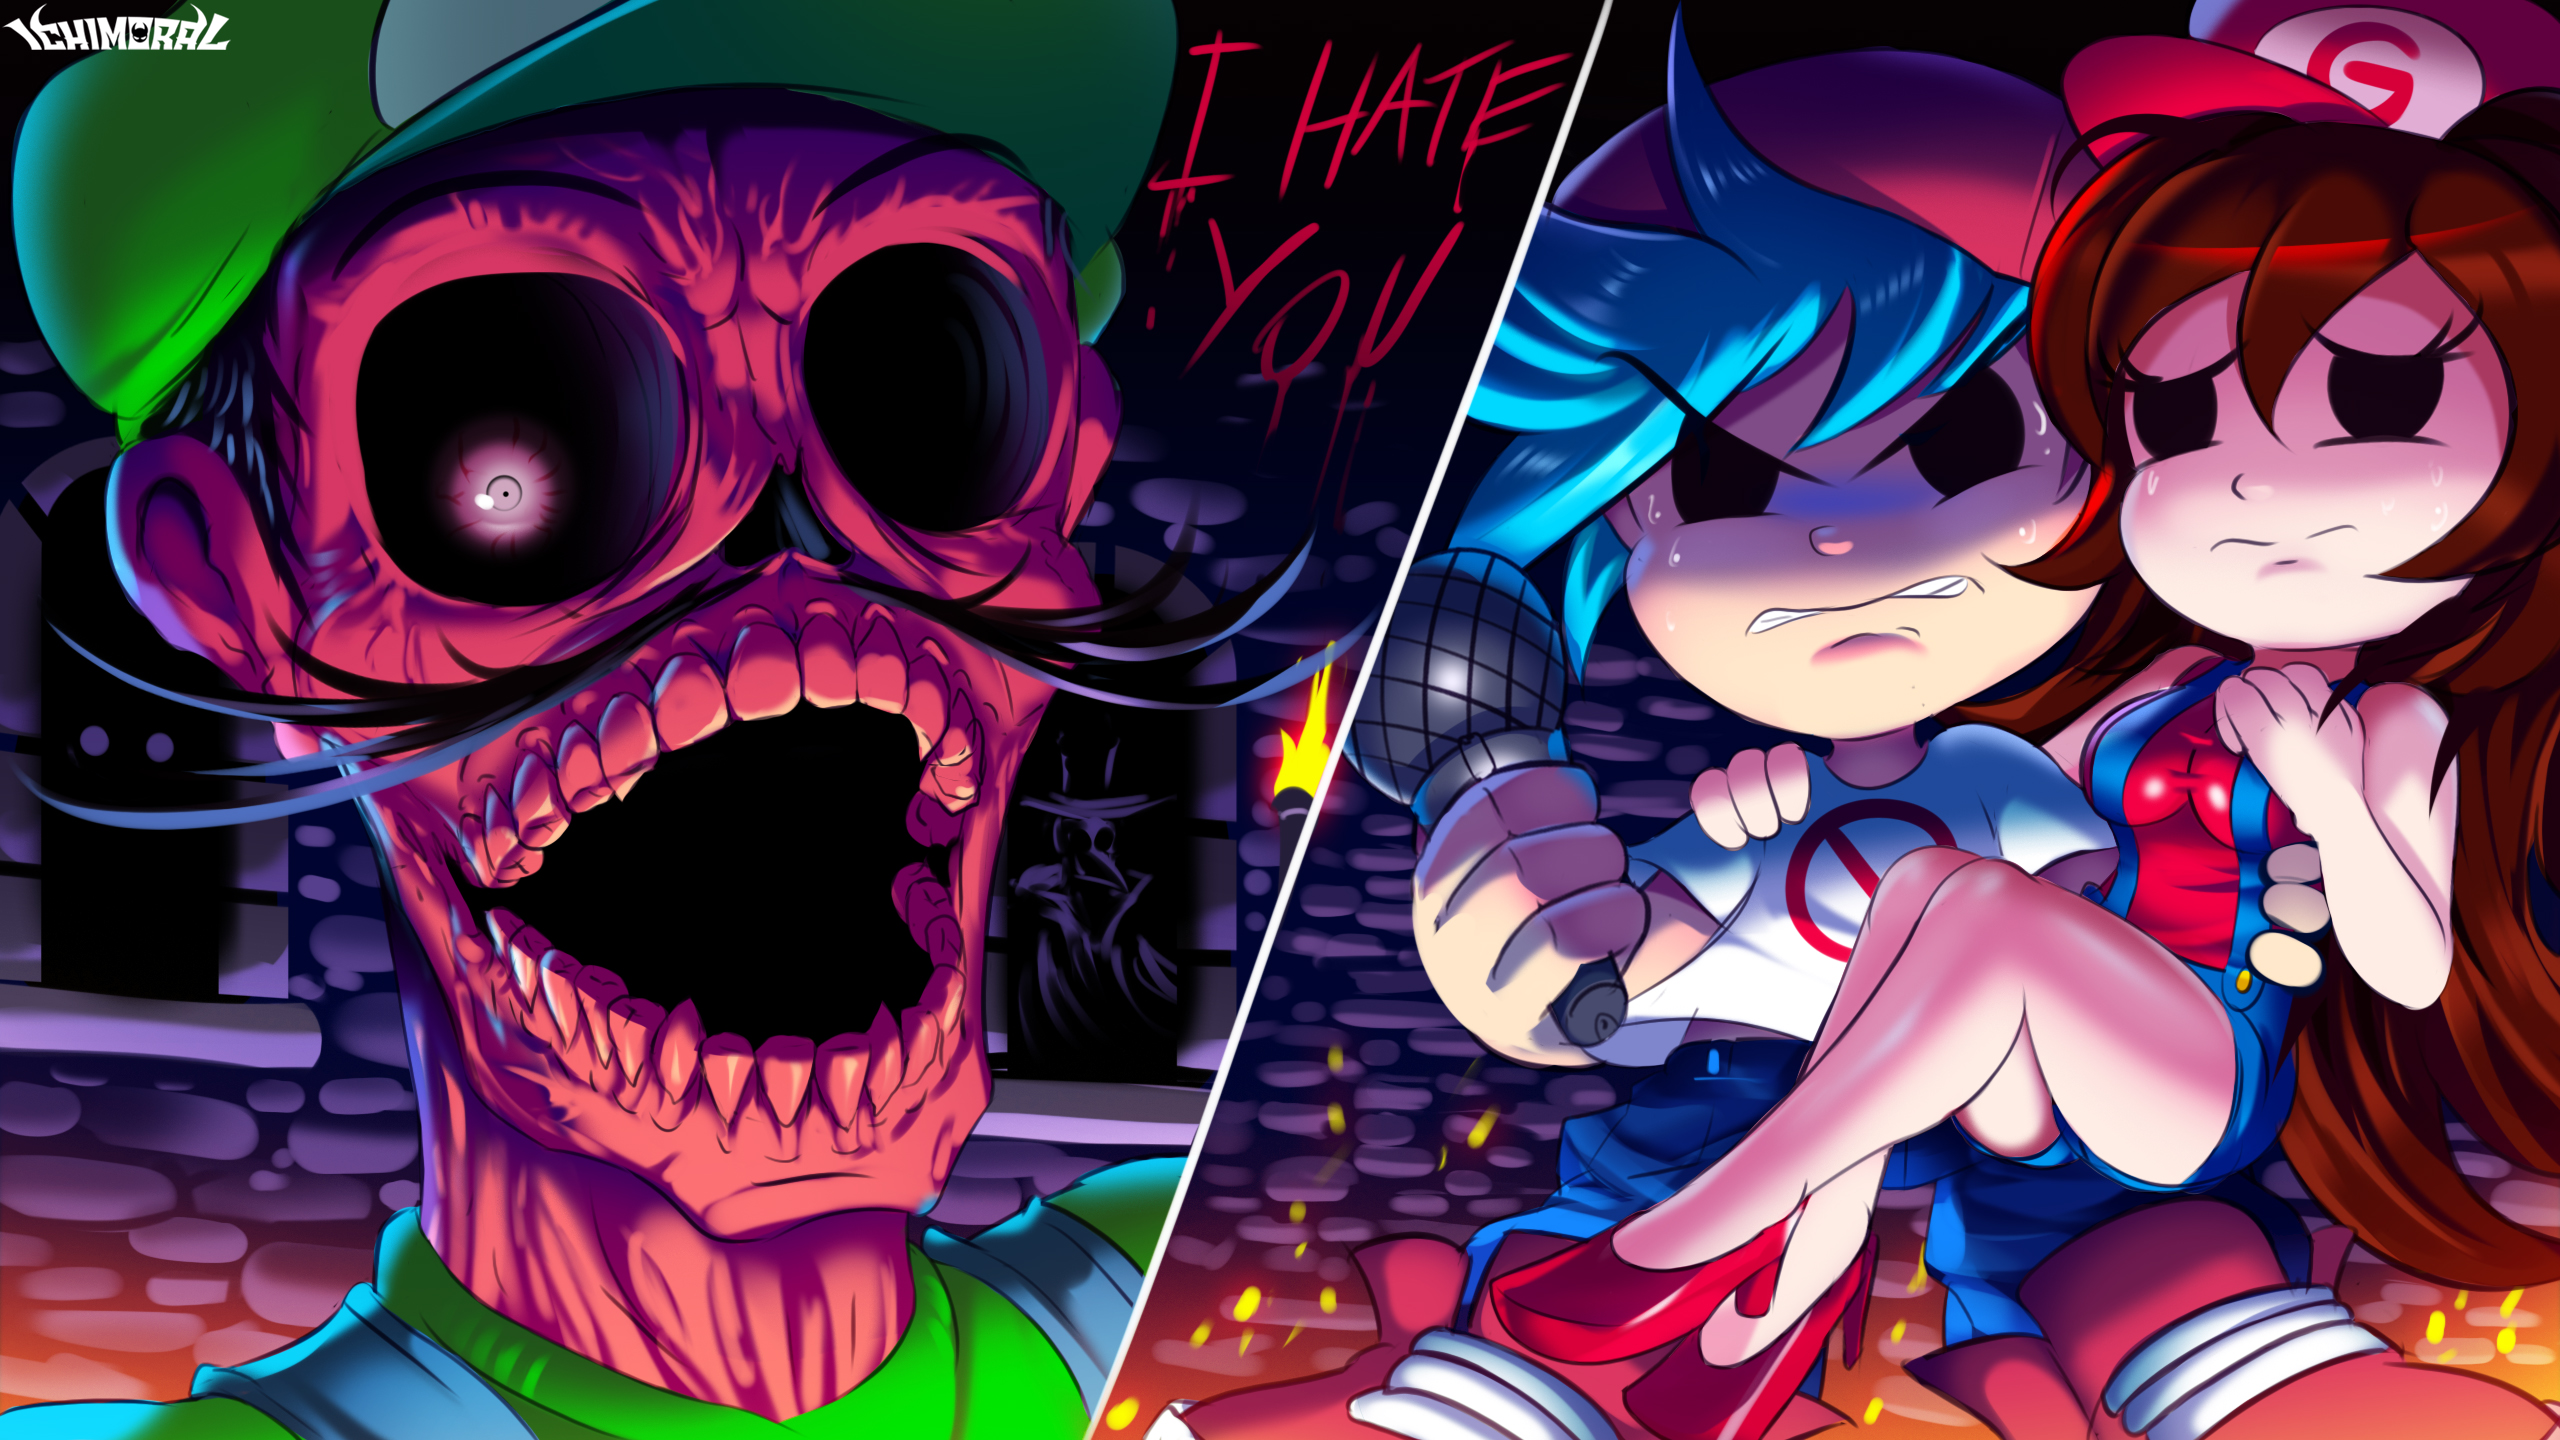 Lord X Sonic by ichimoral on DeviantArt